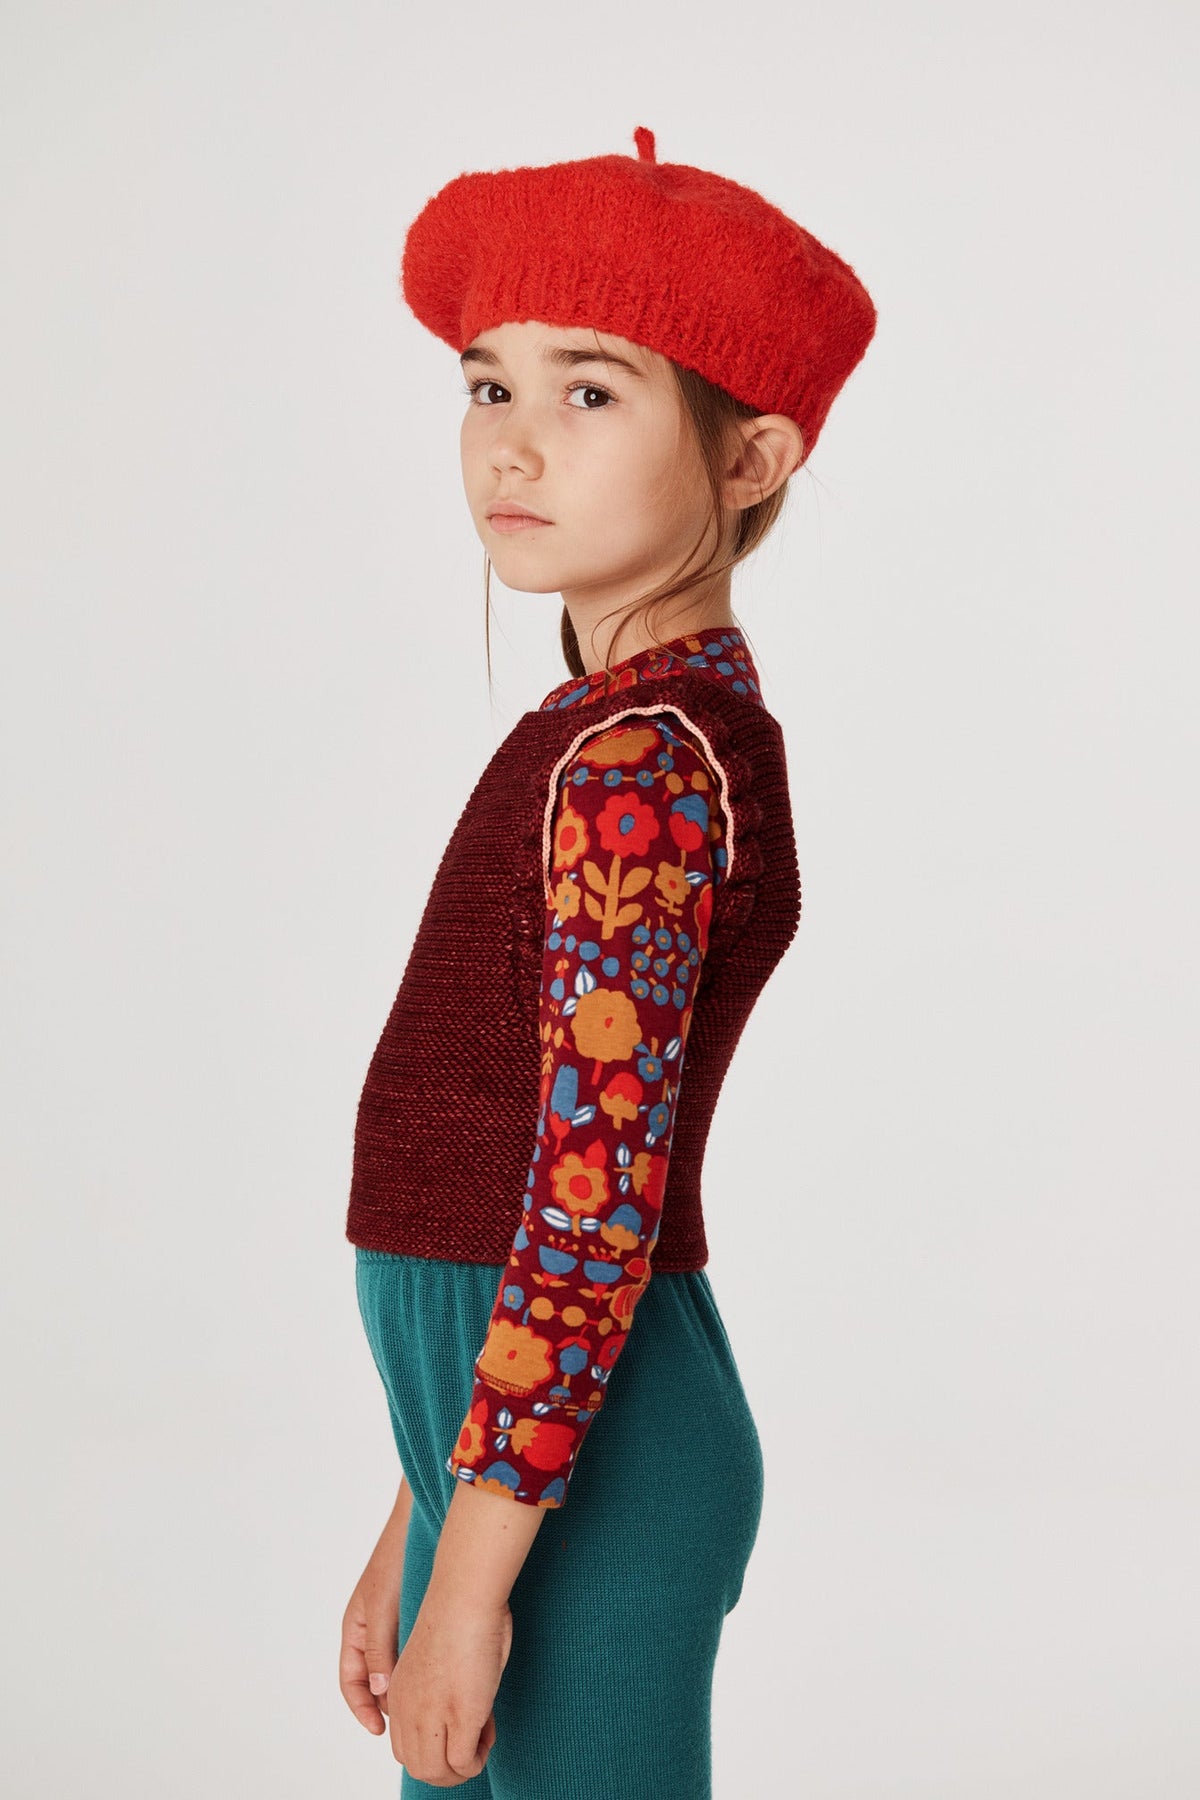 Boucle Simple Beret - Red Flame+Model is 48 inches tall, 44lbs, wearing a size 4-6y